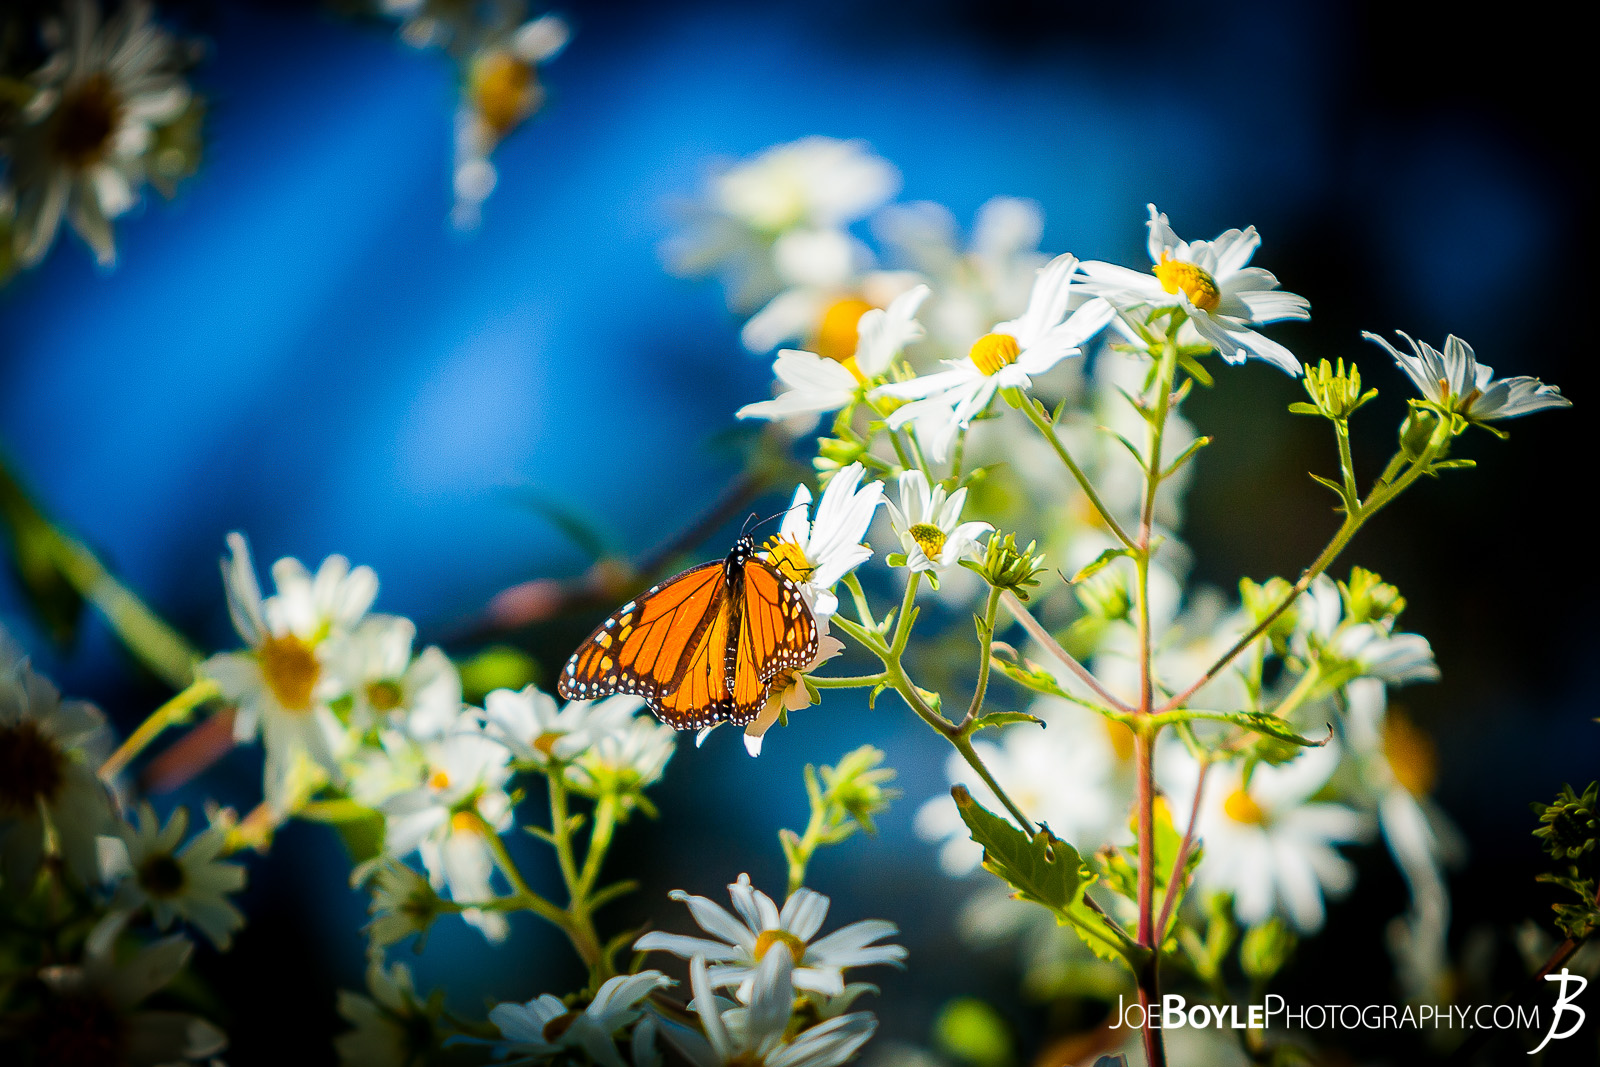  When I was traveling to Monterey, California I discovered the "Monarch Grove Butterfly Sanctuary" in Pacific Grove. This is a "resting place" in the eucalyptus grove for the butterflies as they make their journey towards warmer climates! 